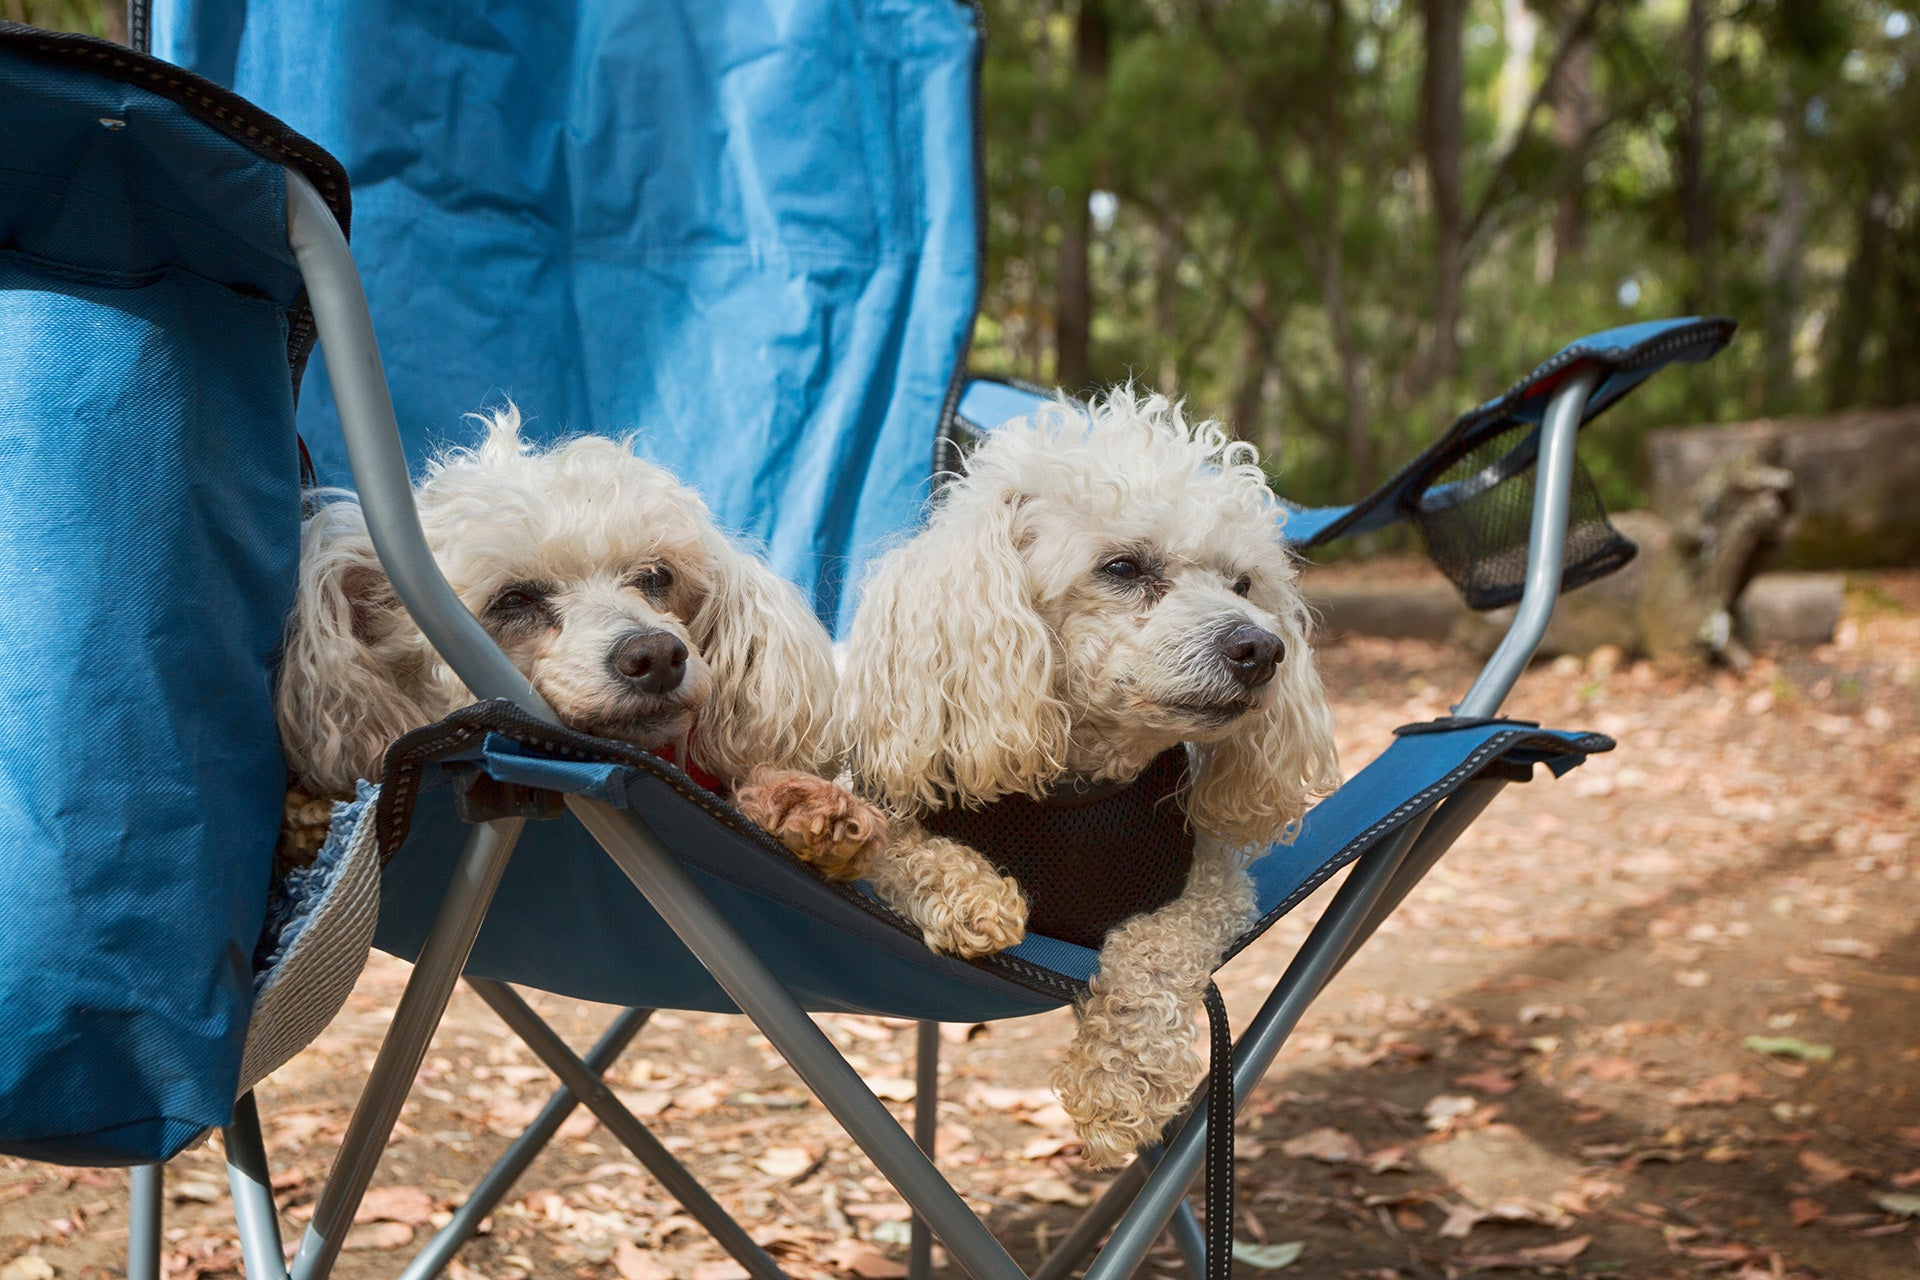 Ruffin' It: The Ultimate Guide to Camping with Your Canine Companion